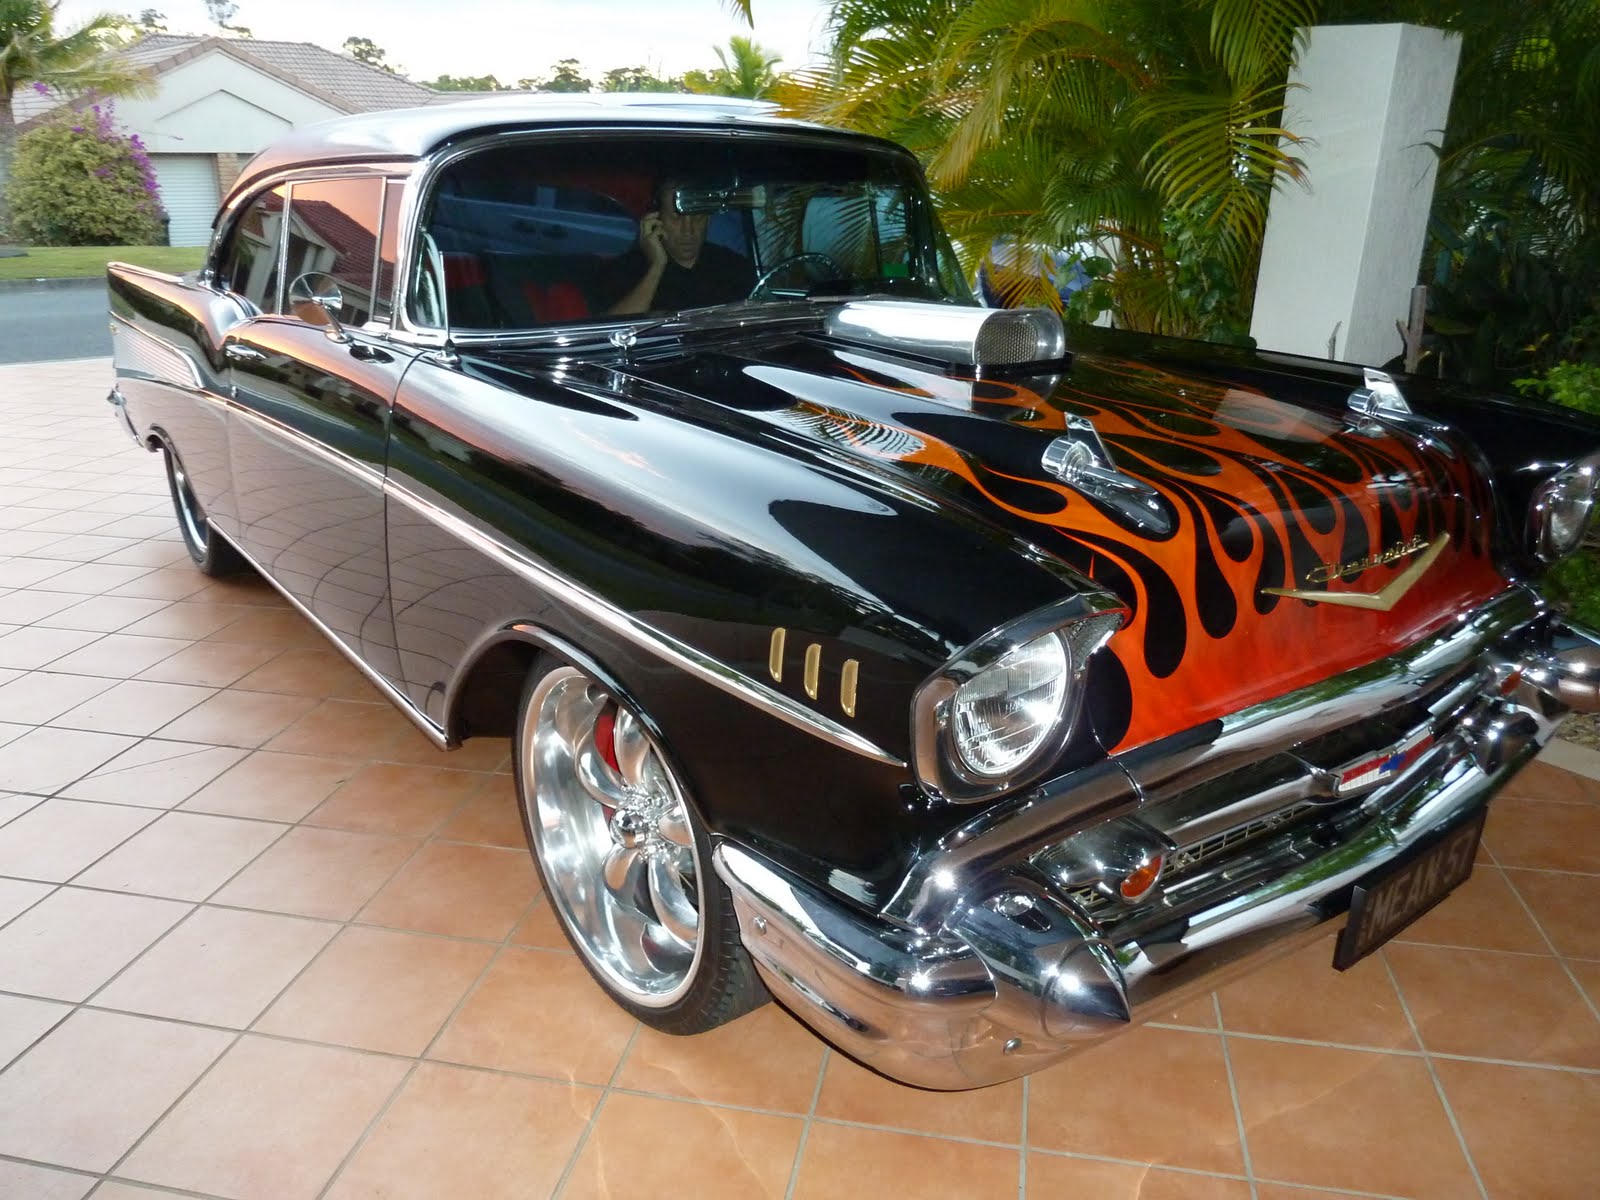 Chevy 57 Cars Chevrolet Feathers 1957 Bel Air Chevys Block Thur 1955 Pro Co...